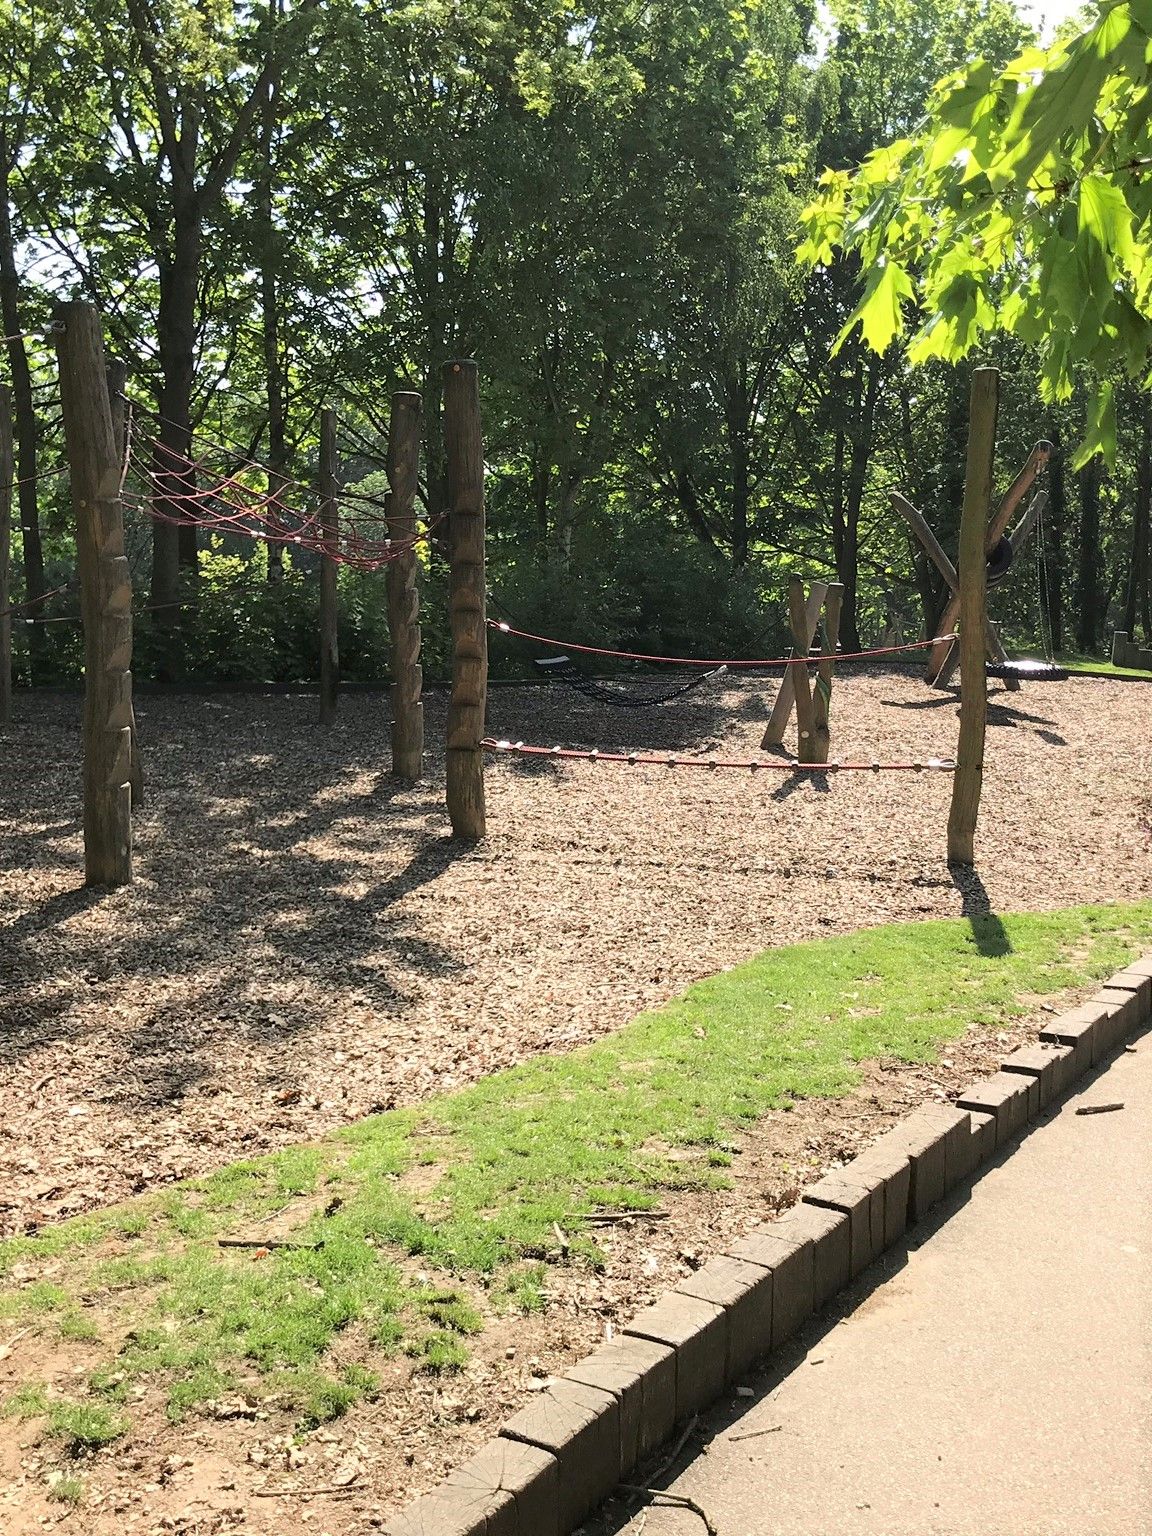 Children's play park in the wooded area.